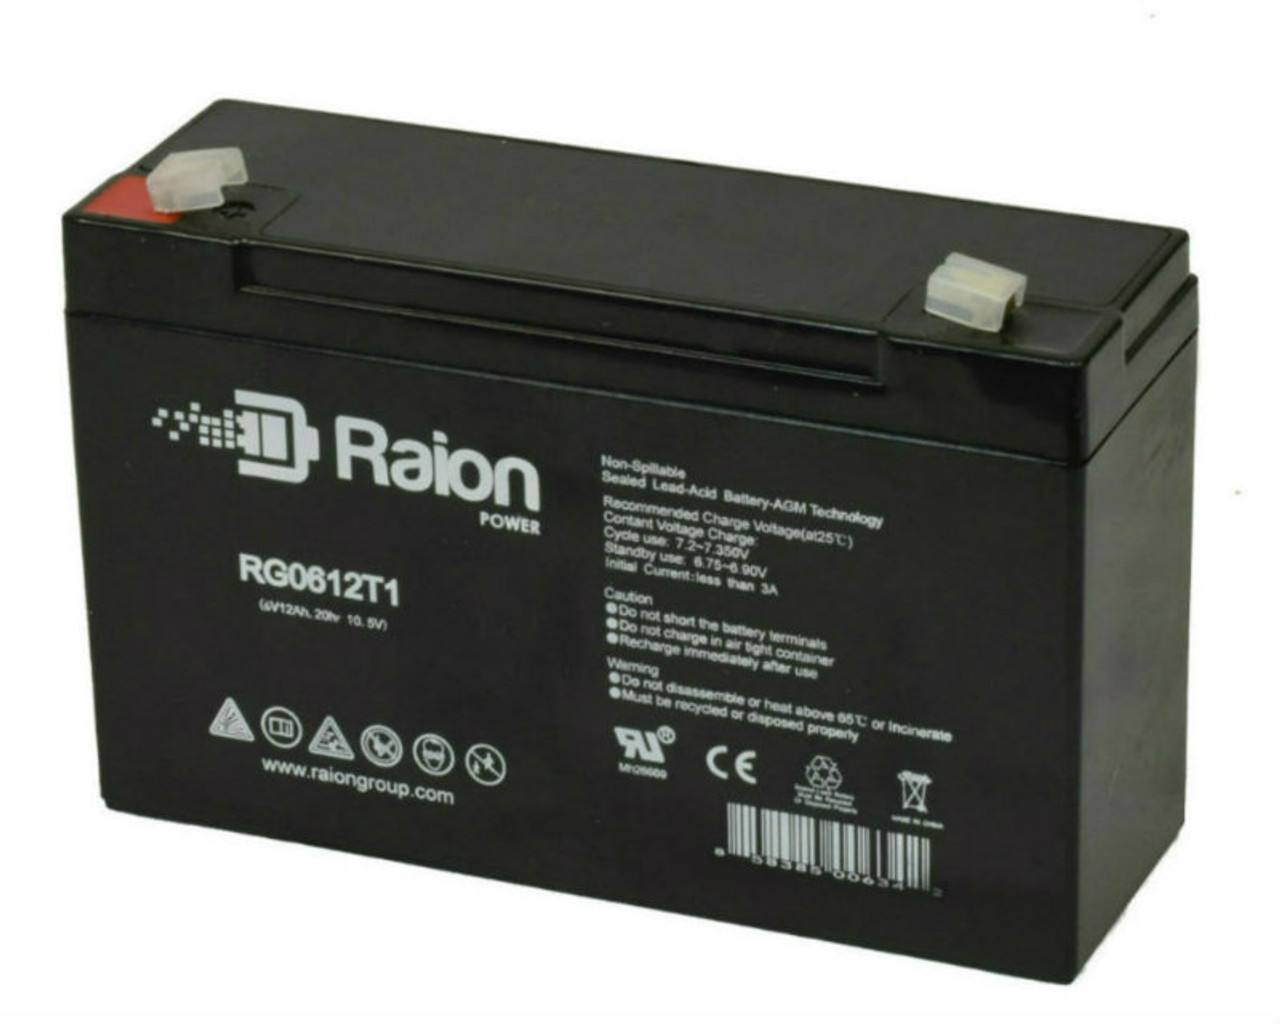 Raion Power RG06120T1 Replacement Battery for Ohio 2 Modulus Plus Medical Equipment